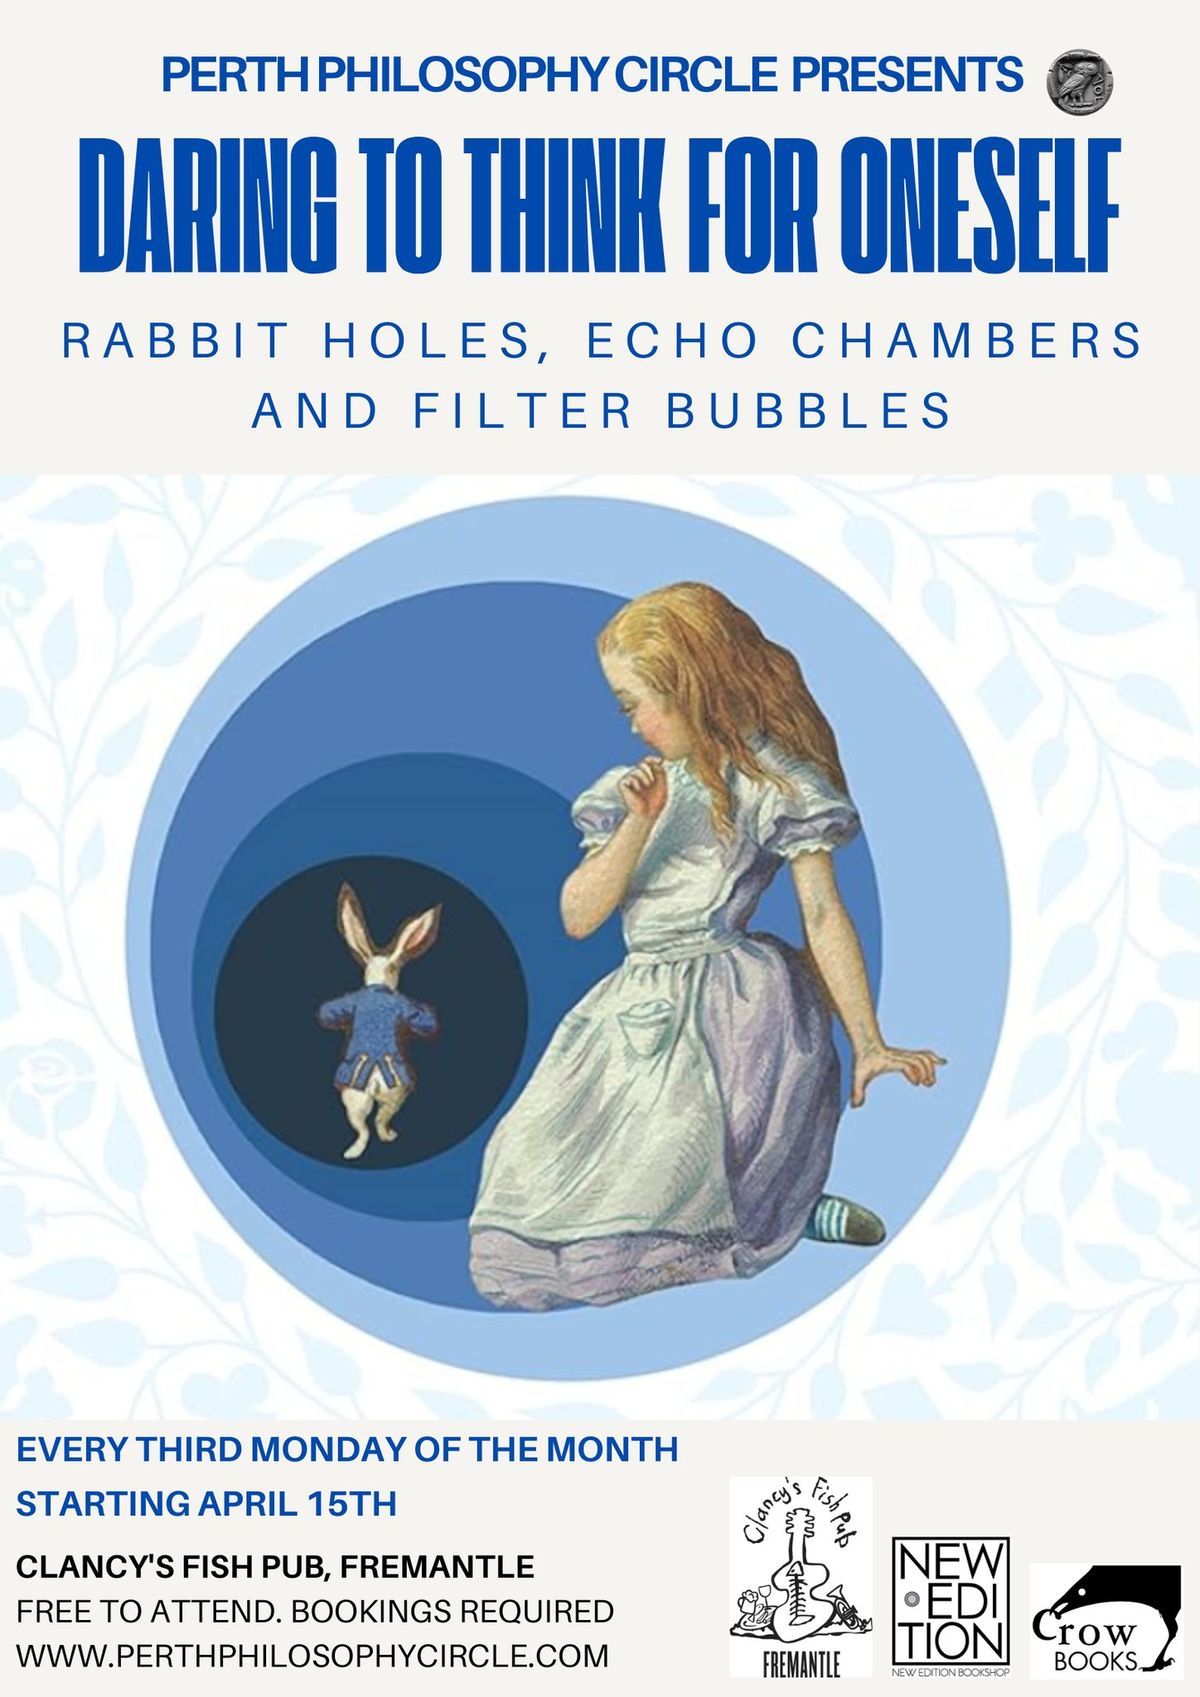 Daring to Think for Oneself: Rabbit Holes, Echo Chambers, and Filter Bubbles